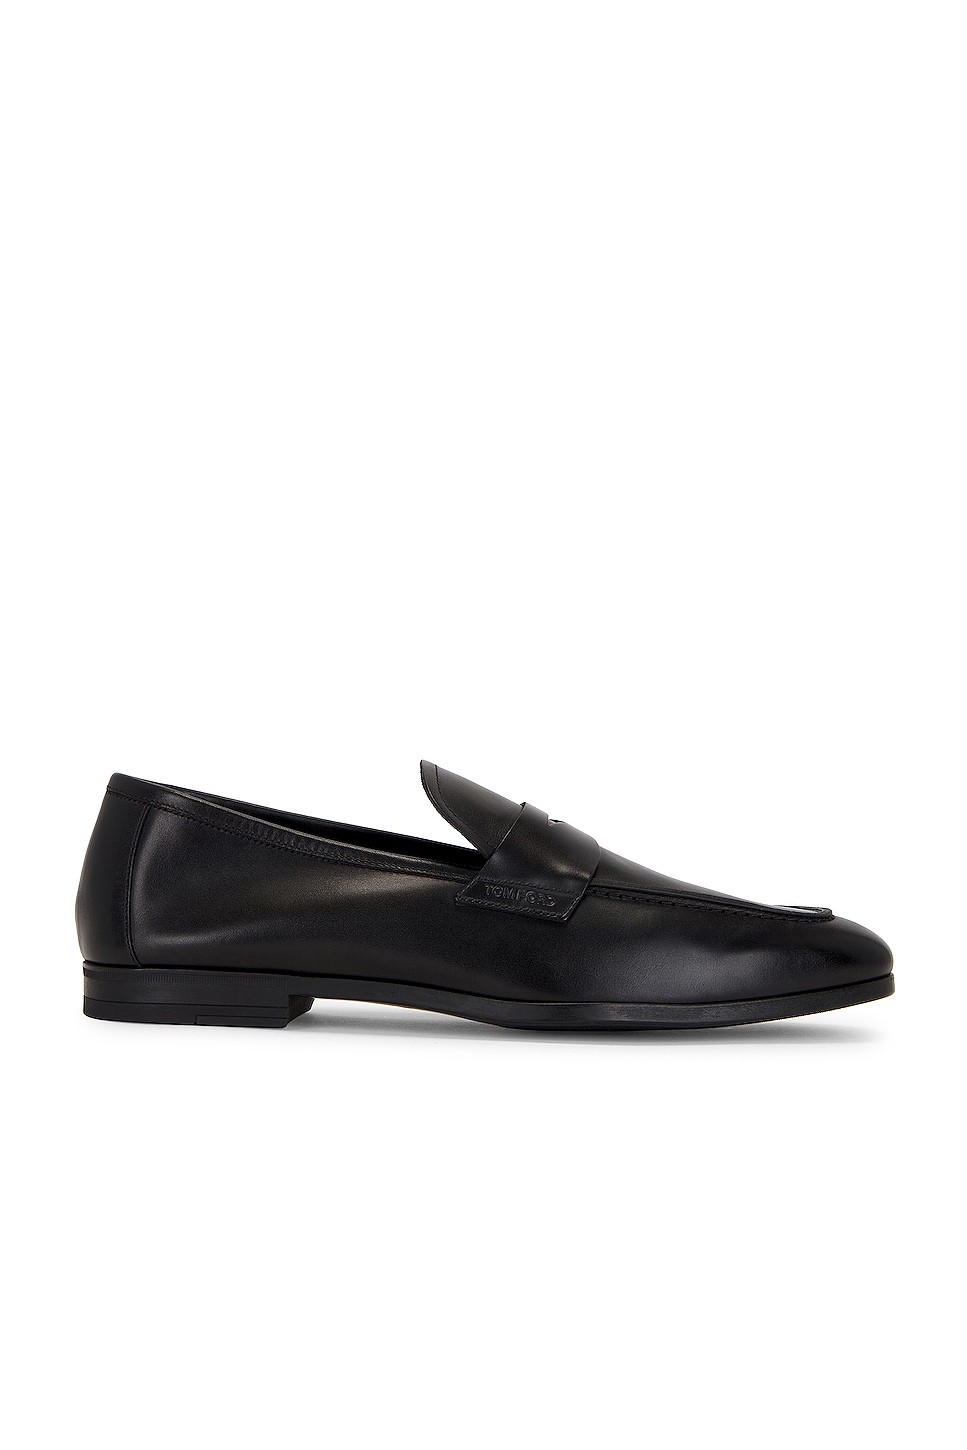 Image 1 of TOM FORD Smooth Leather Sean Penny Loafer in Black